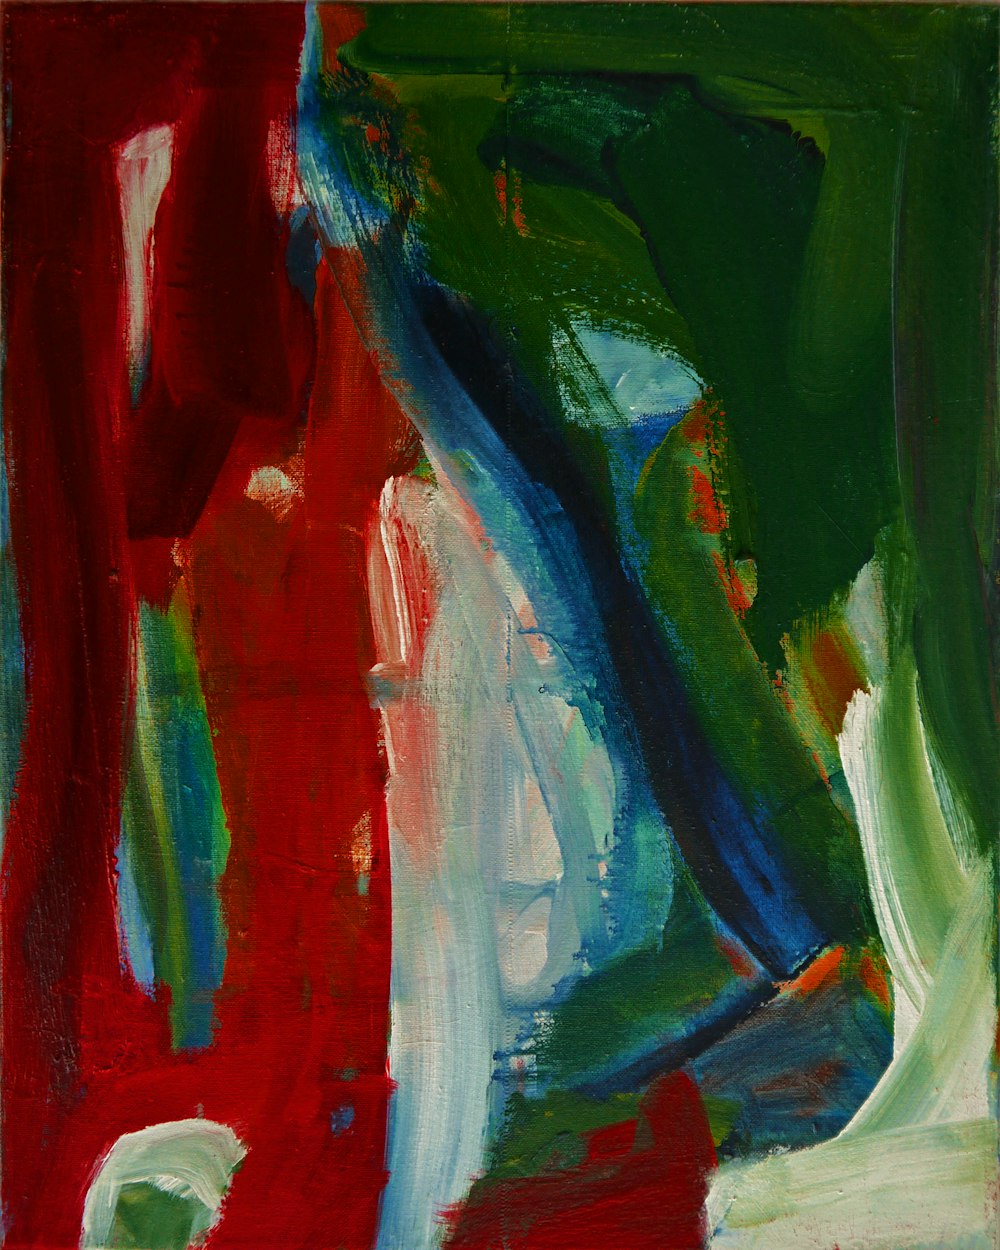 an abstract painting with red, green, and blue colors